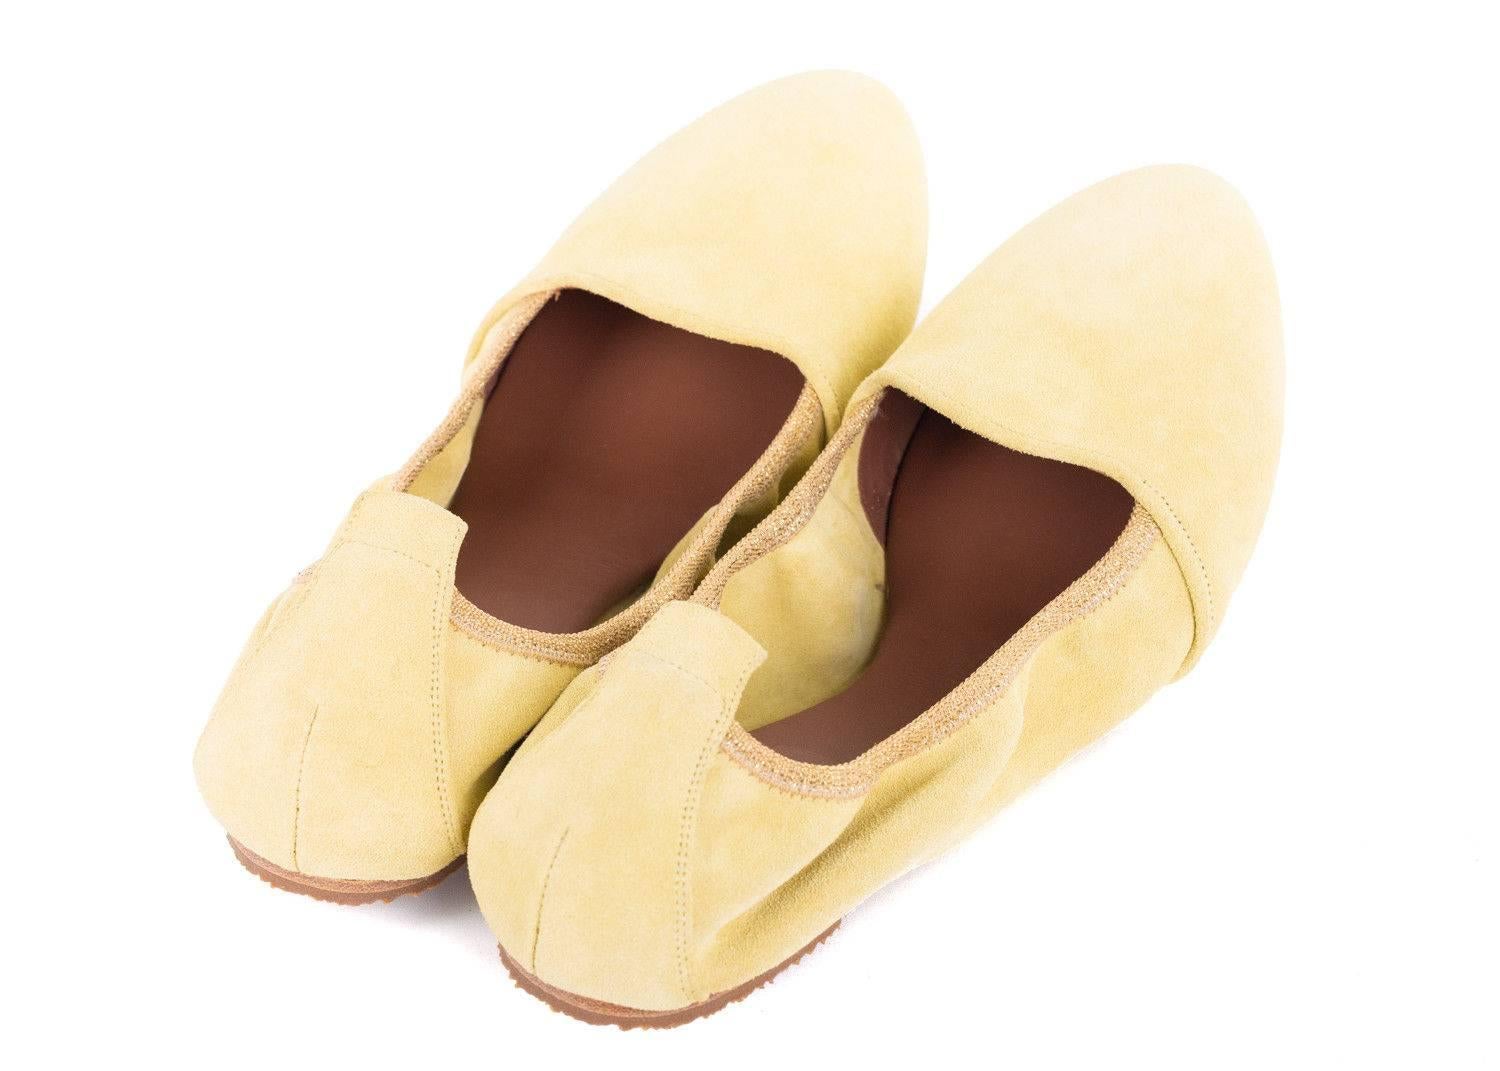 Brunello Cucinelli's pale yellow ballet flats are every woman's spicy essential. These flats feature a richly smooth suede panel, gold lurex trimmed elastic band, and tonal heel cap. You can pair these shoes with any dress, pants, or two piece